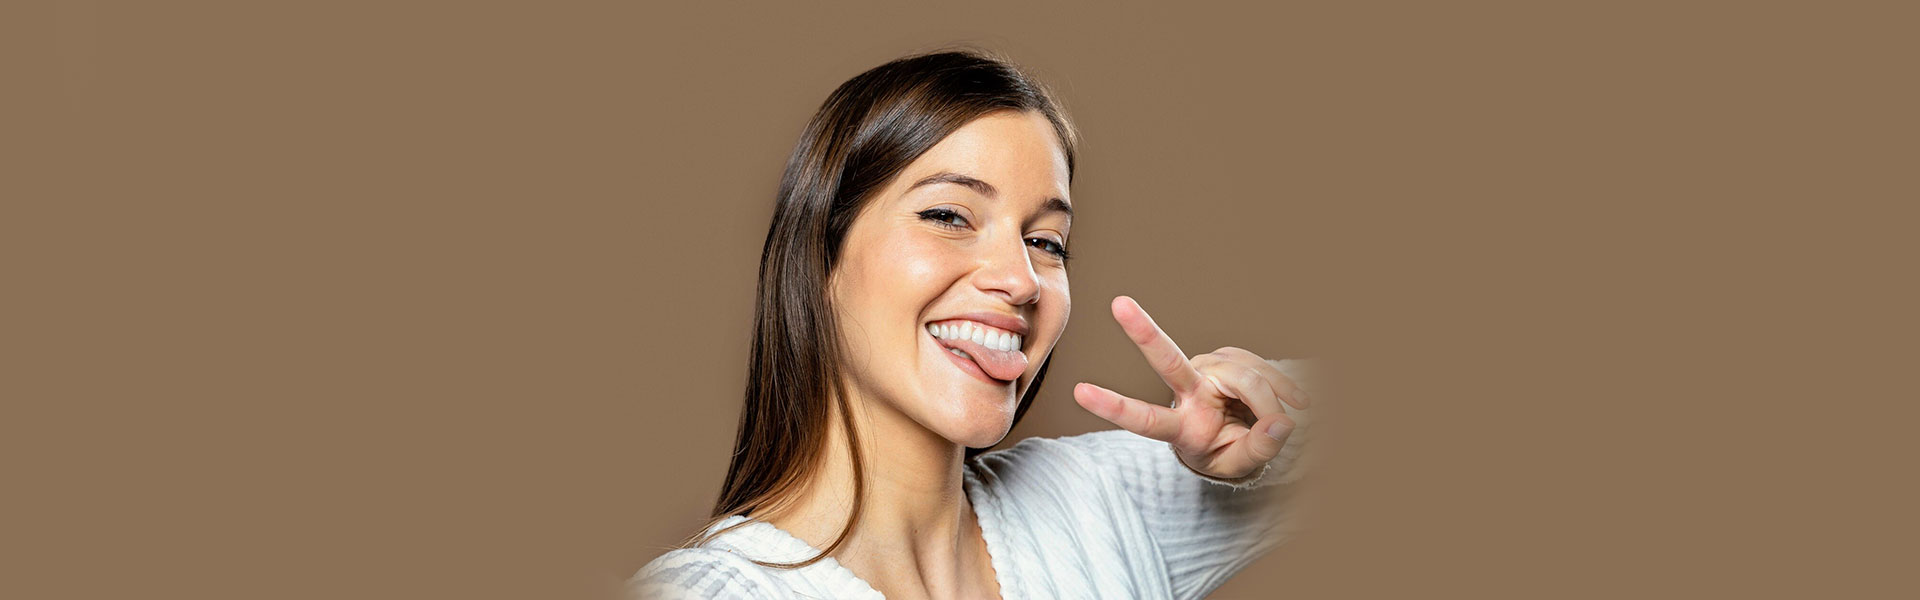 How to Choose the Right Dental Bonding Material for Your Teeth?